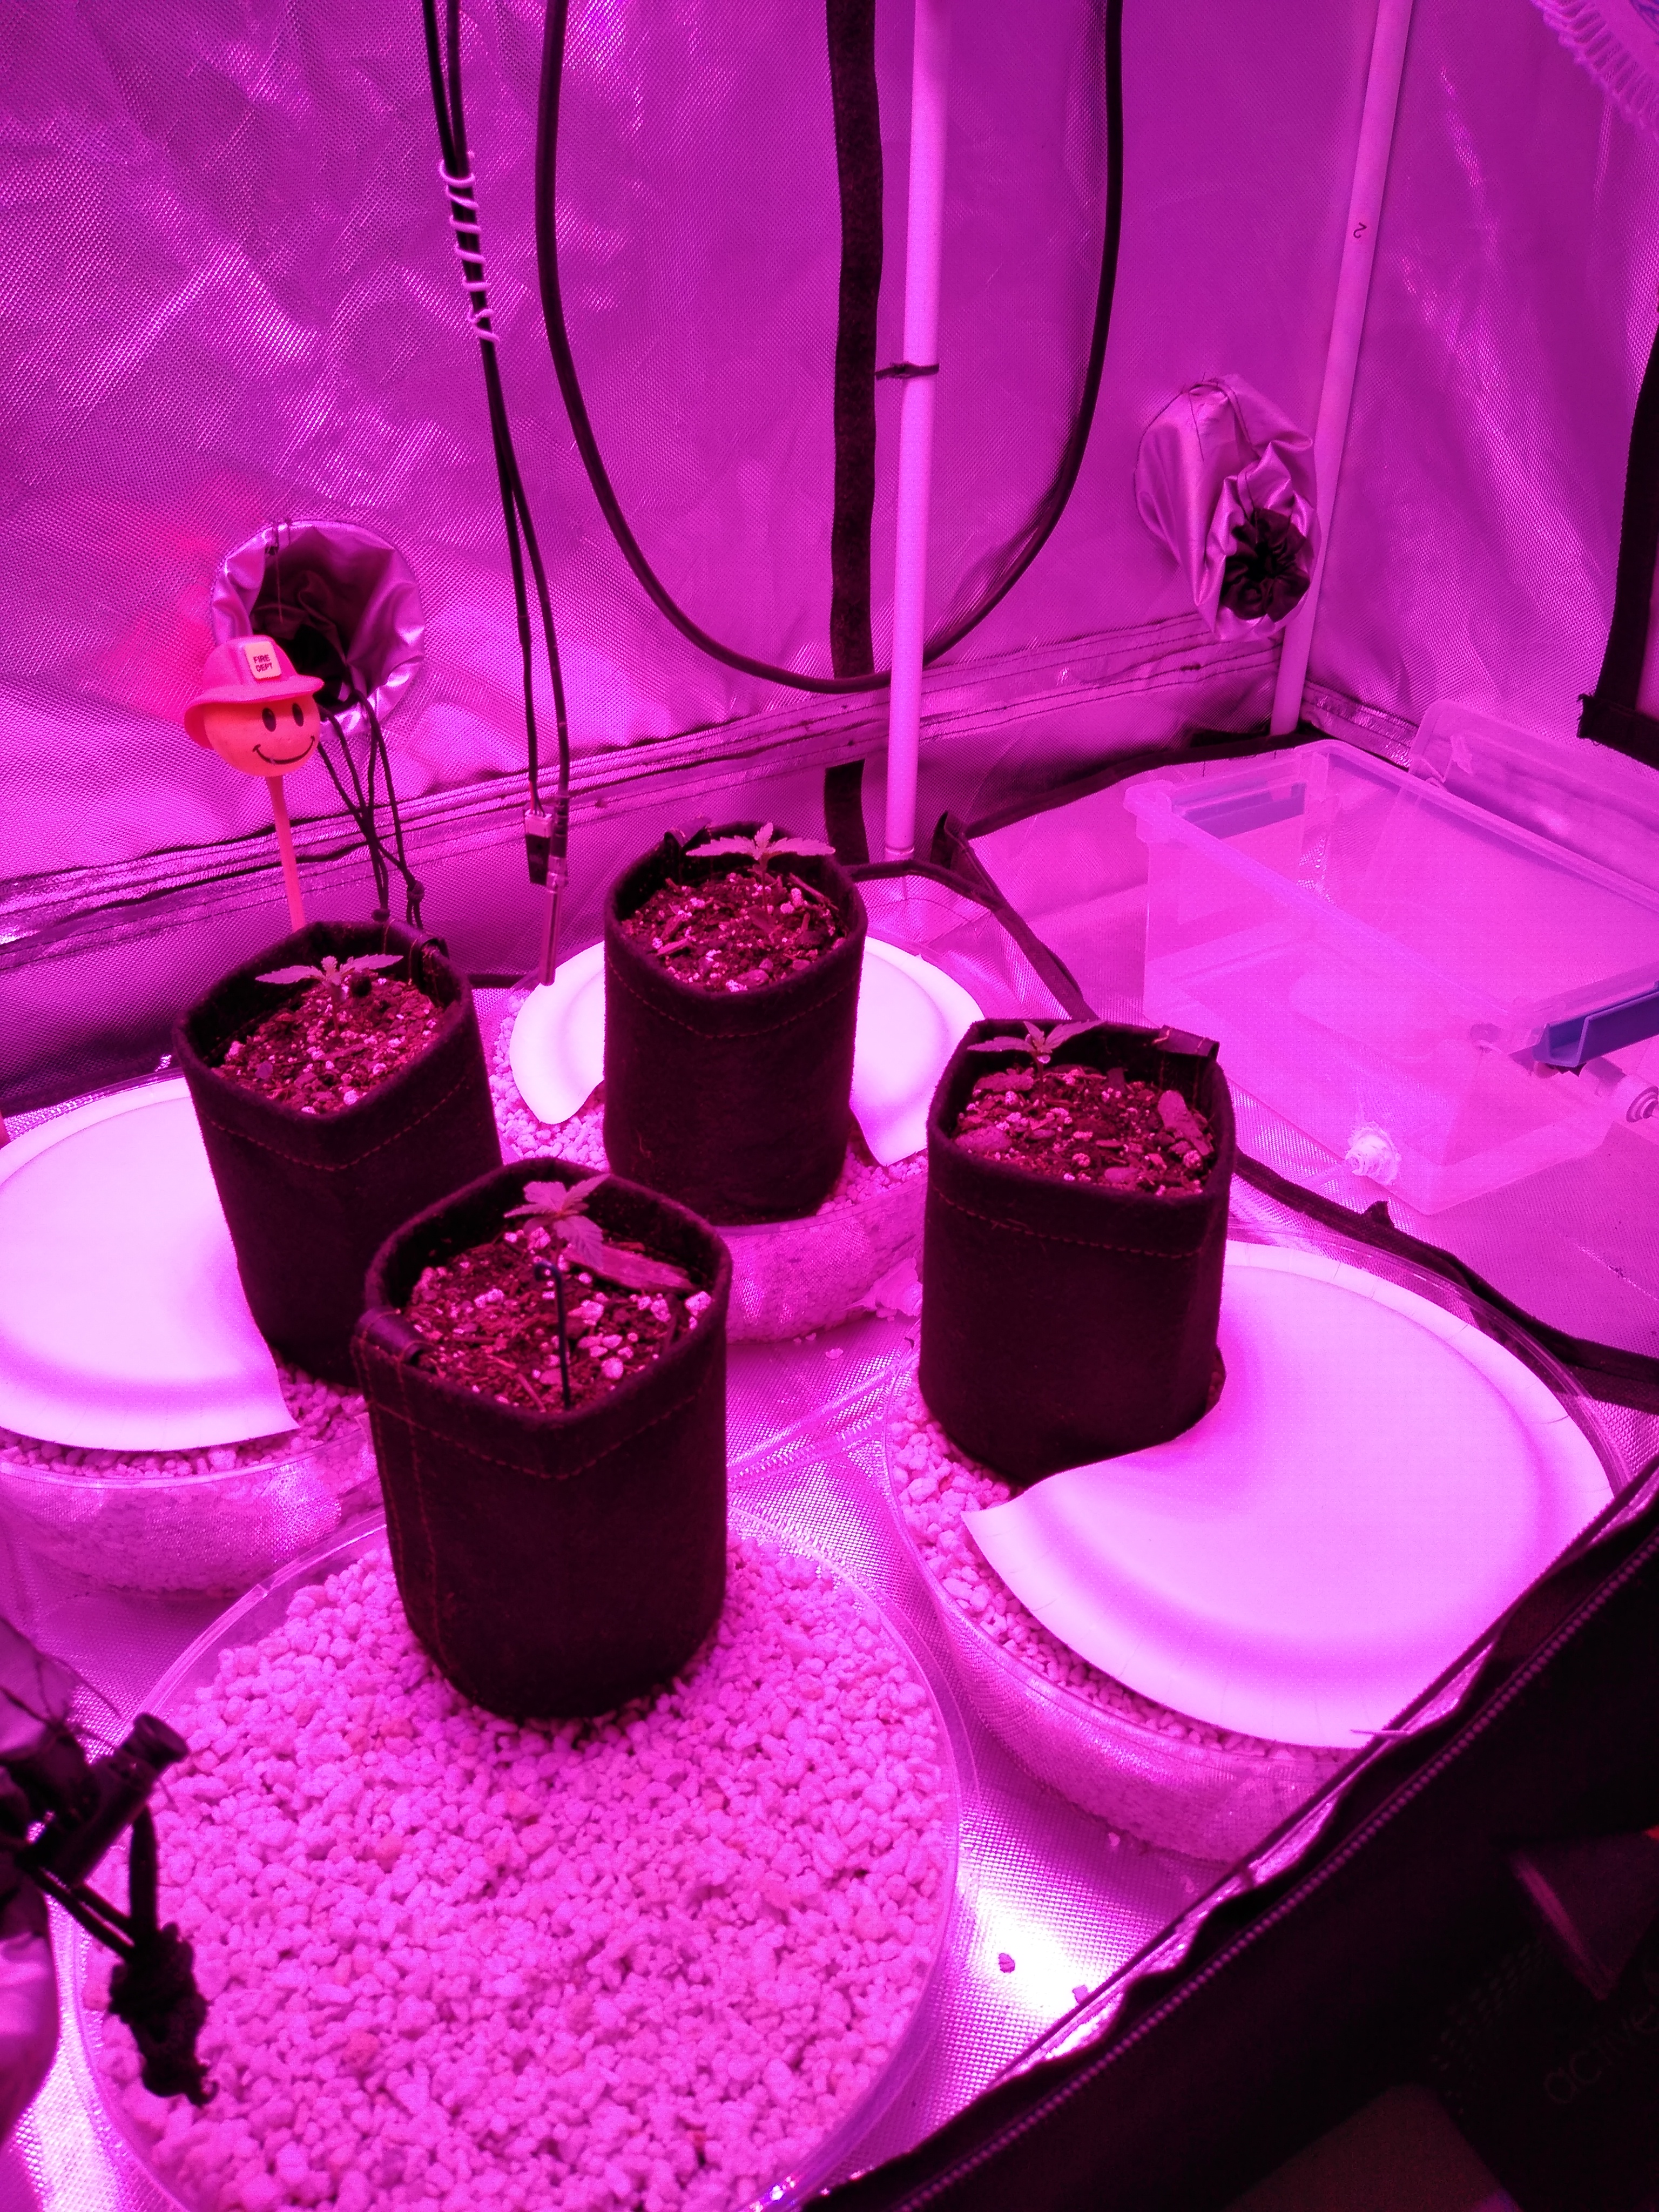 Sub irrigation saucers w/ WW auto seedlings (W1, D7) in air pots